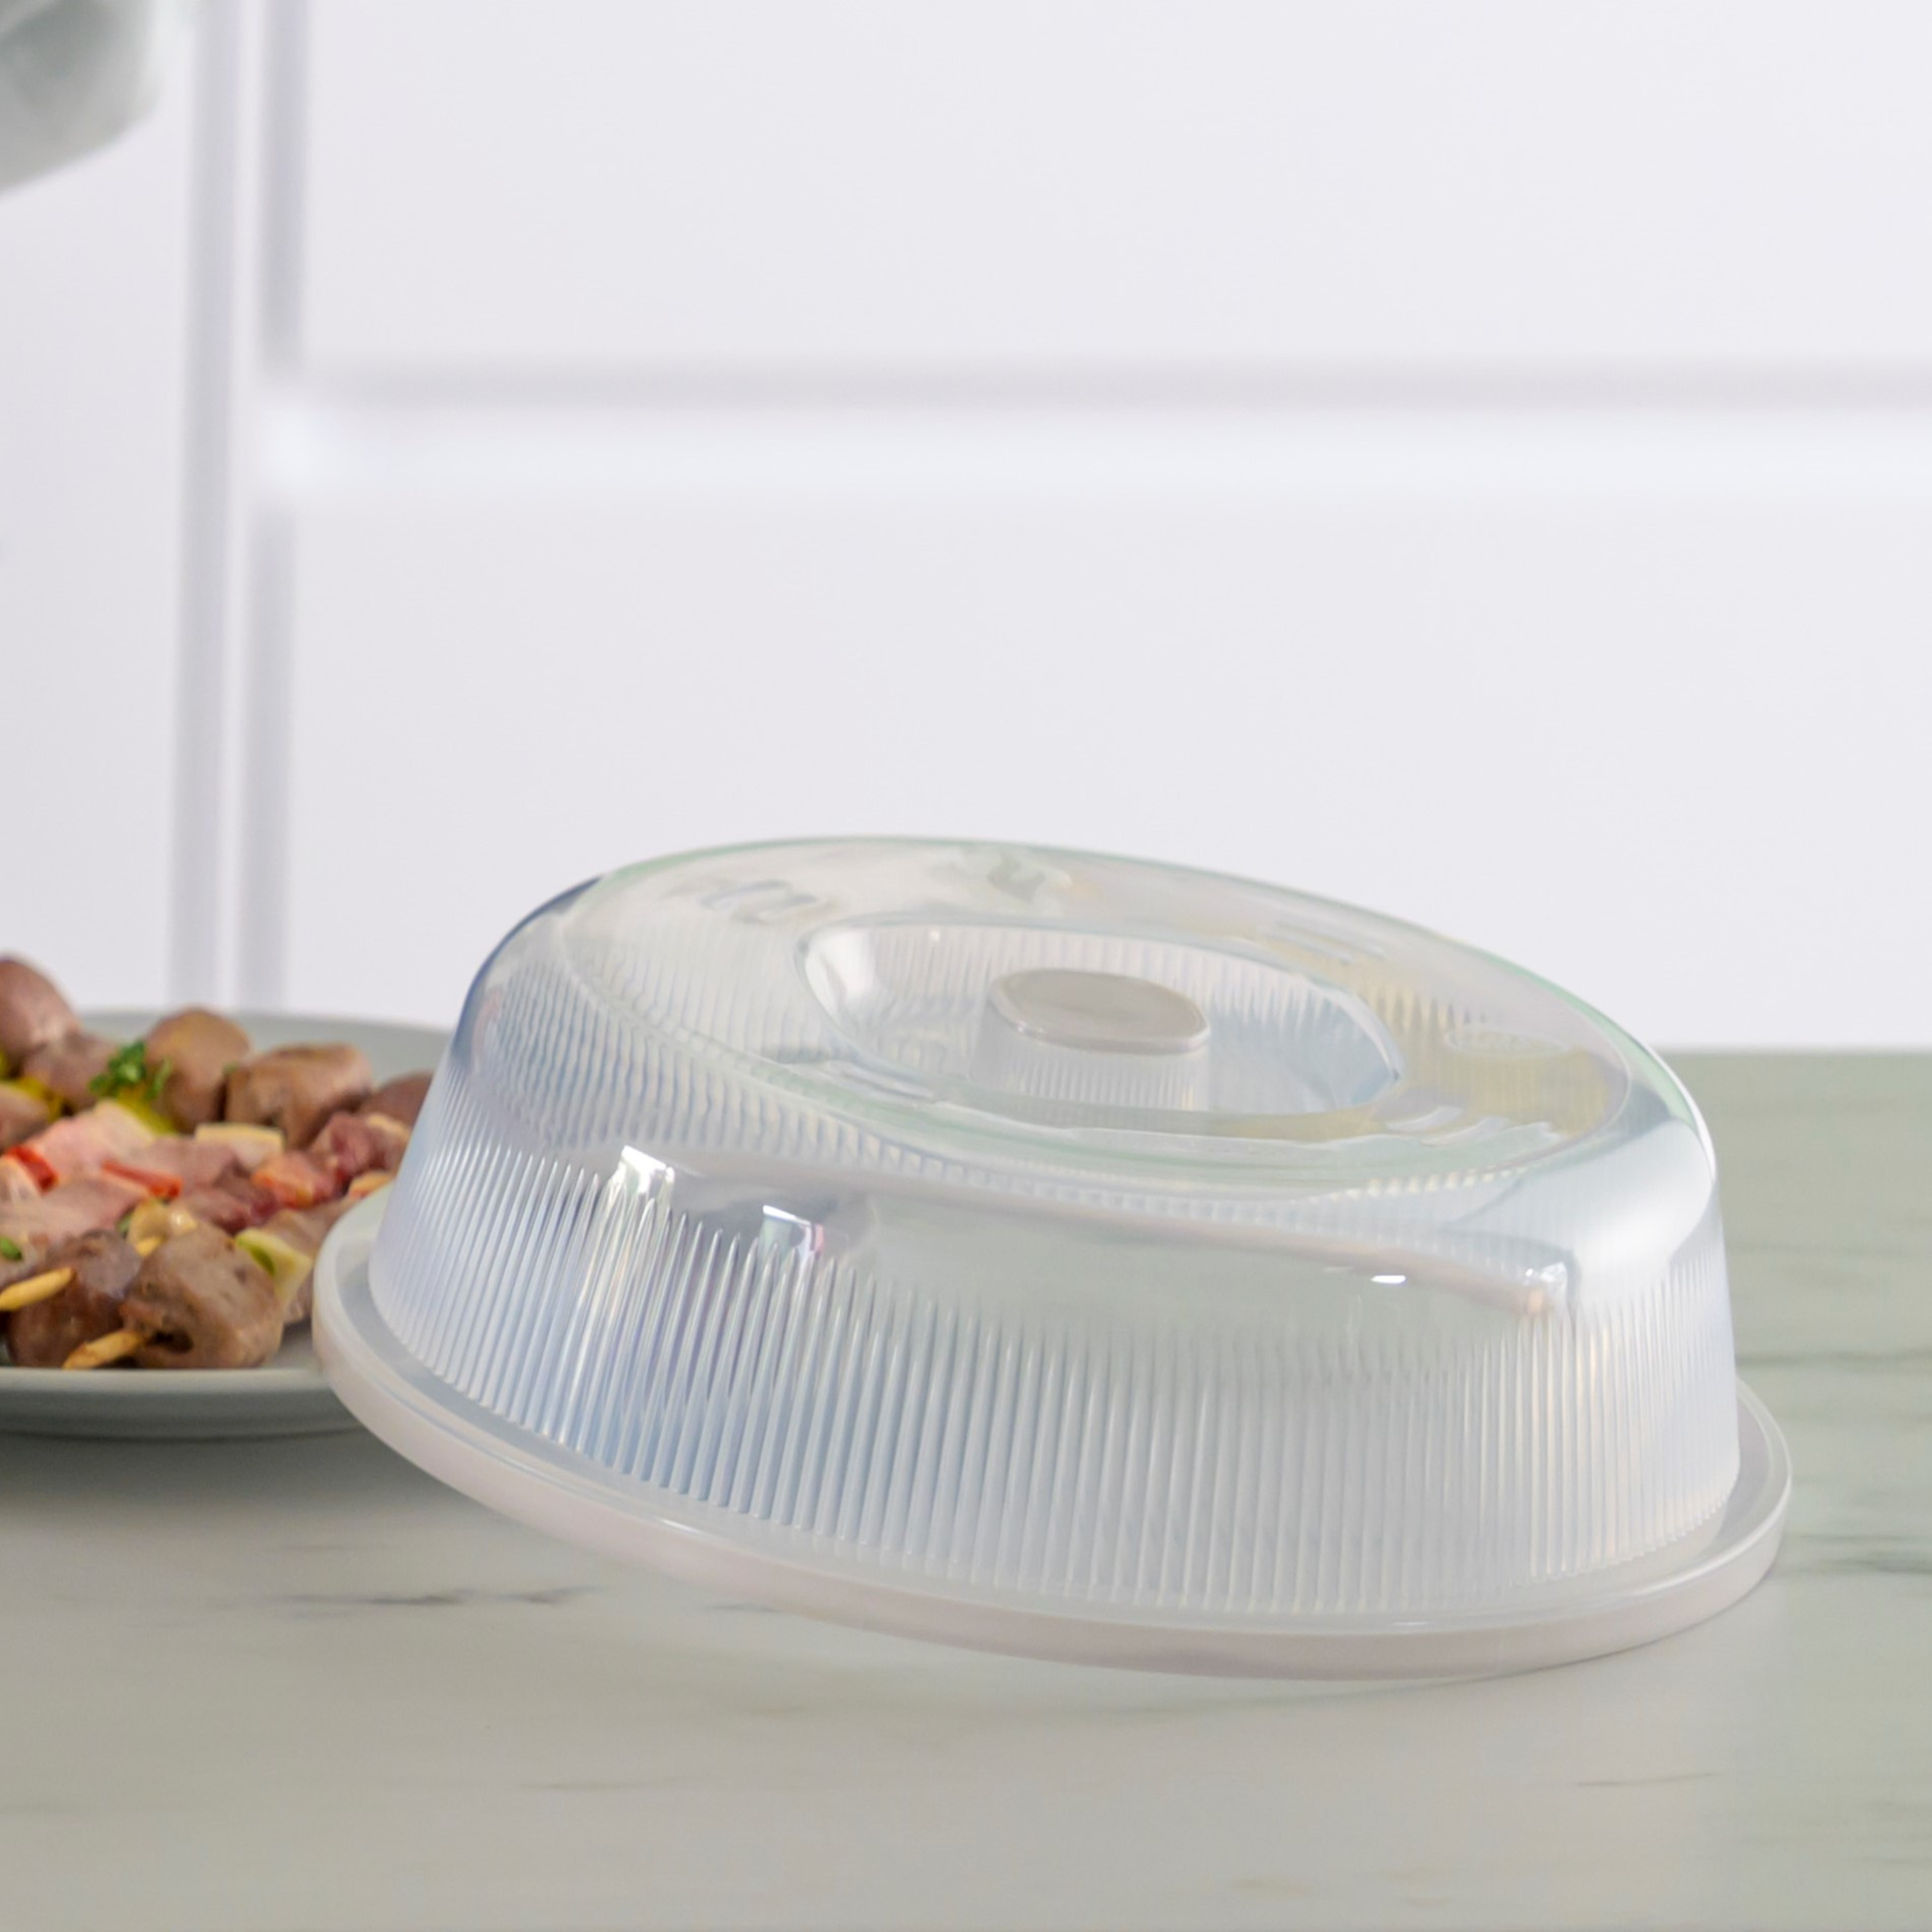 CARE + PROTECT Microwave Plate Cover, Prevent Splashes